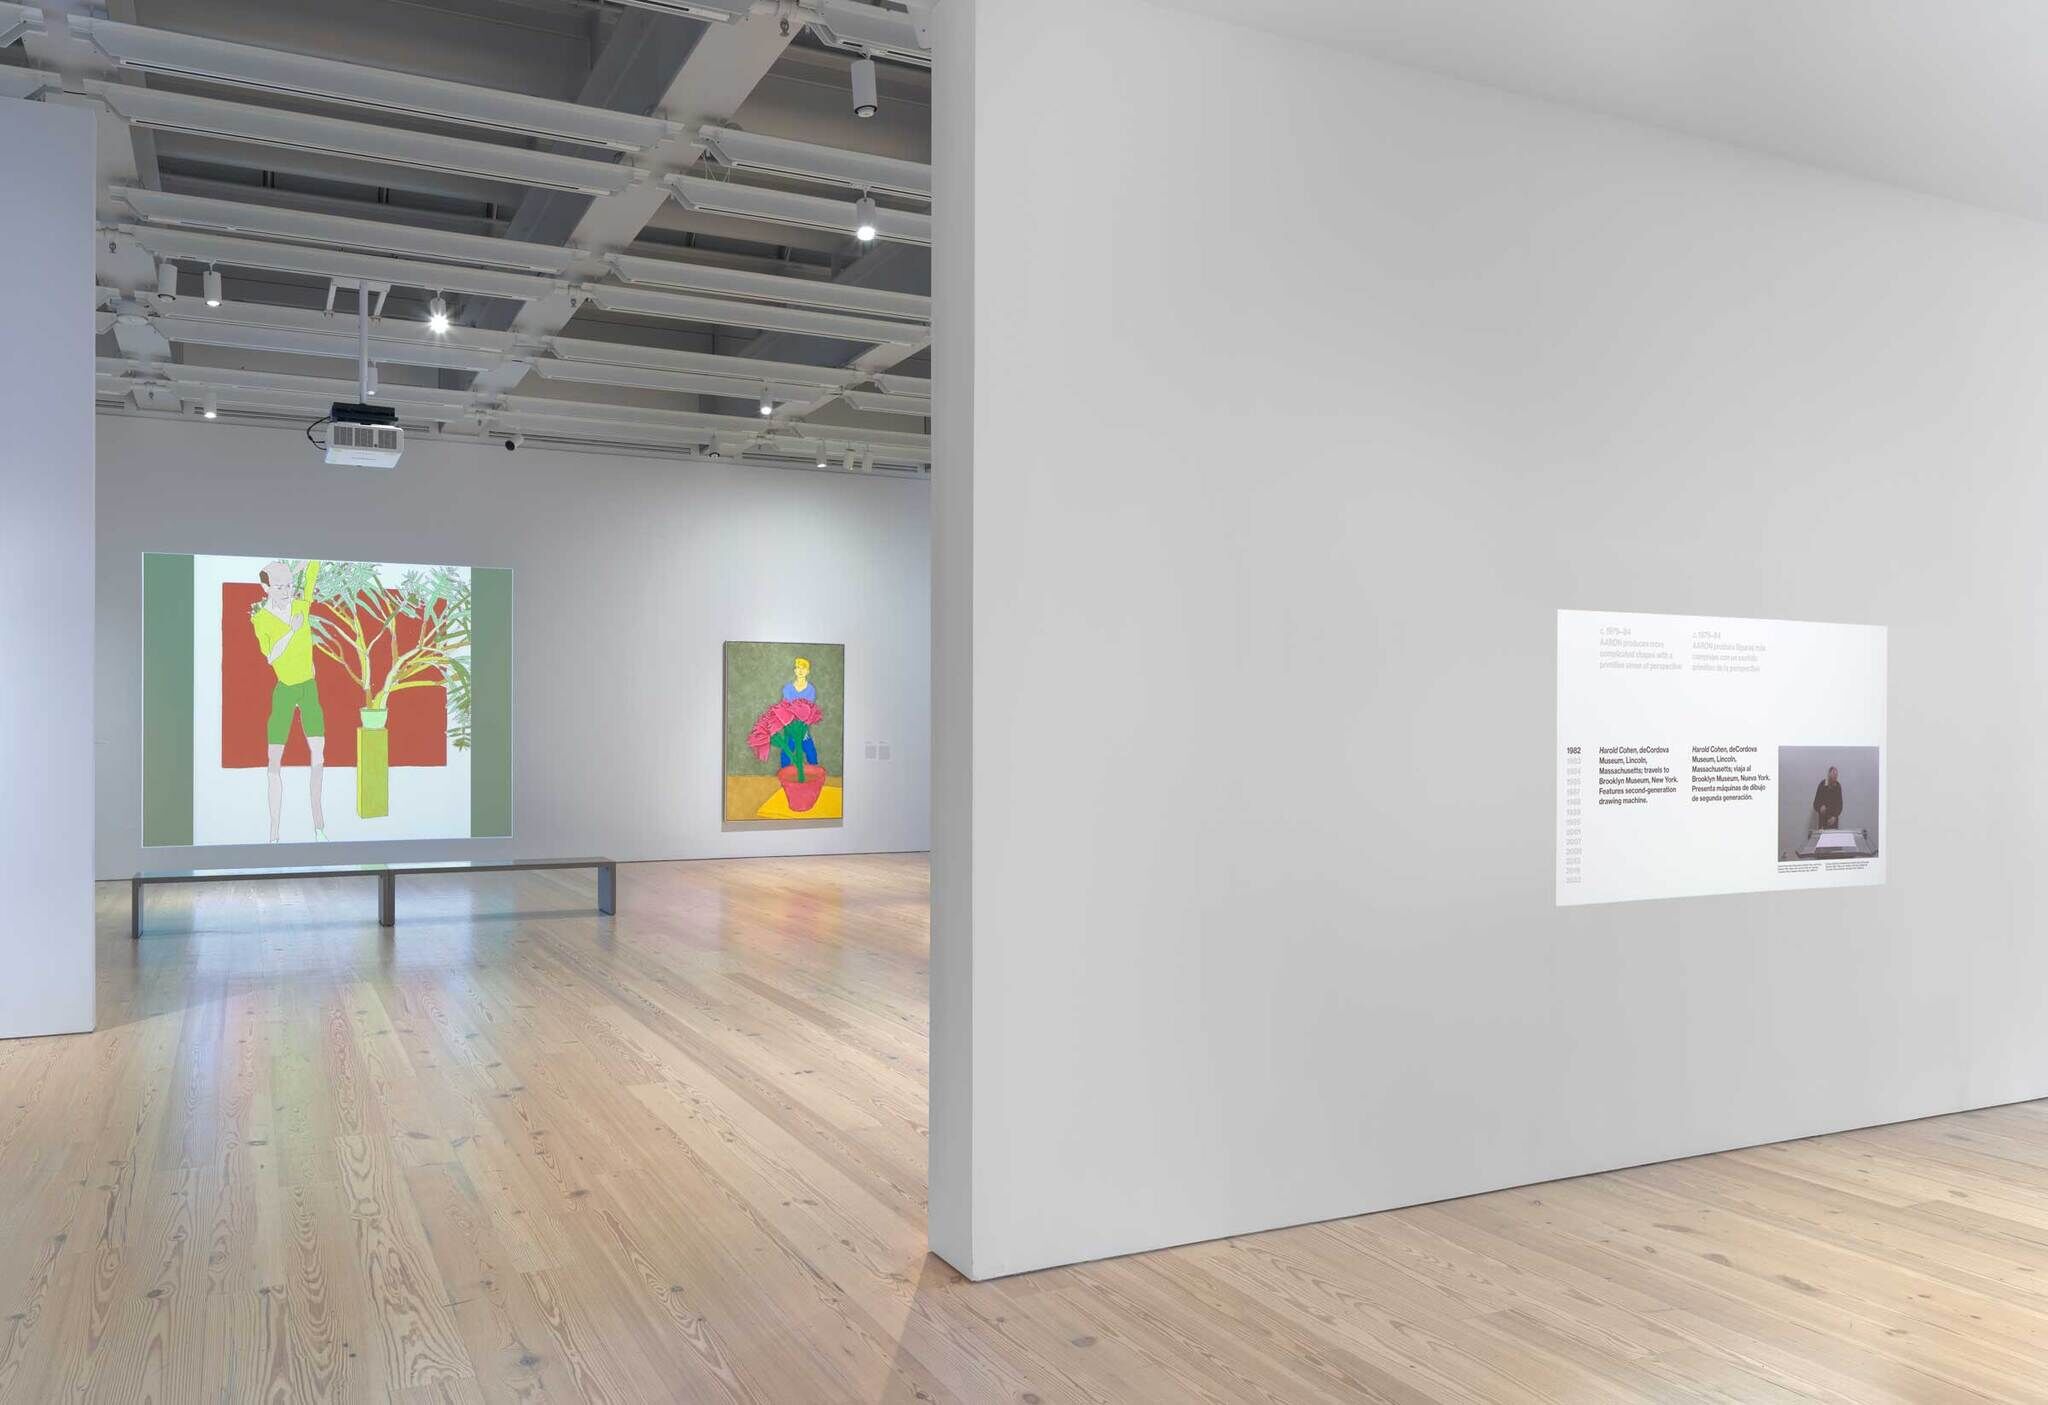 Modern art gallery interior with two colorful paintings on white walls and informational text panels.